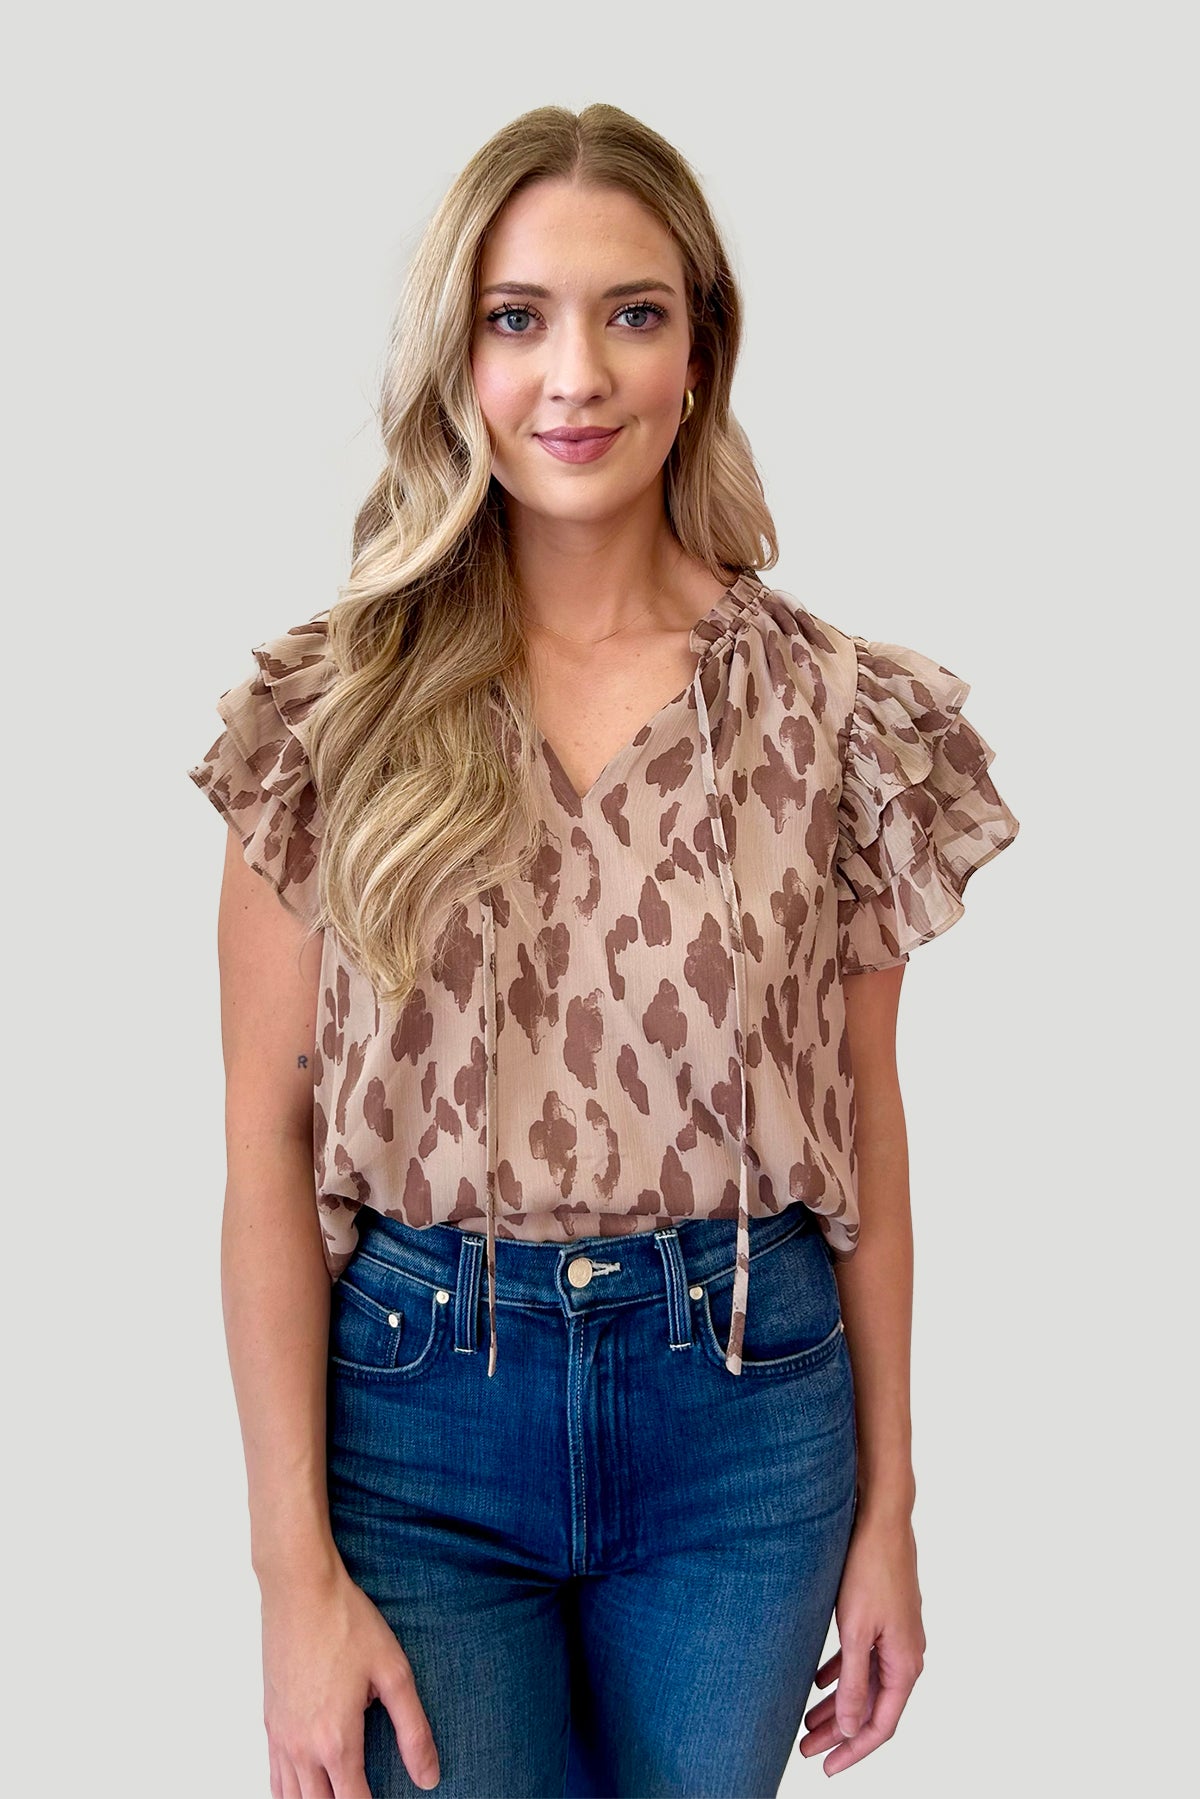 Mocha/Brown Spotted Ruffle Top